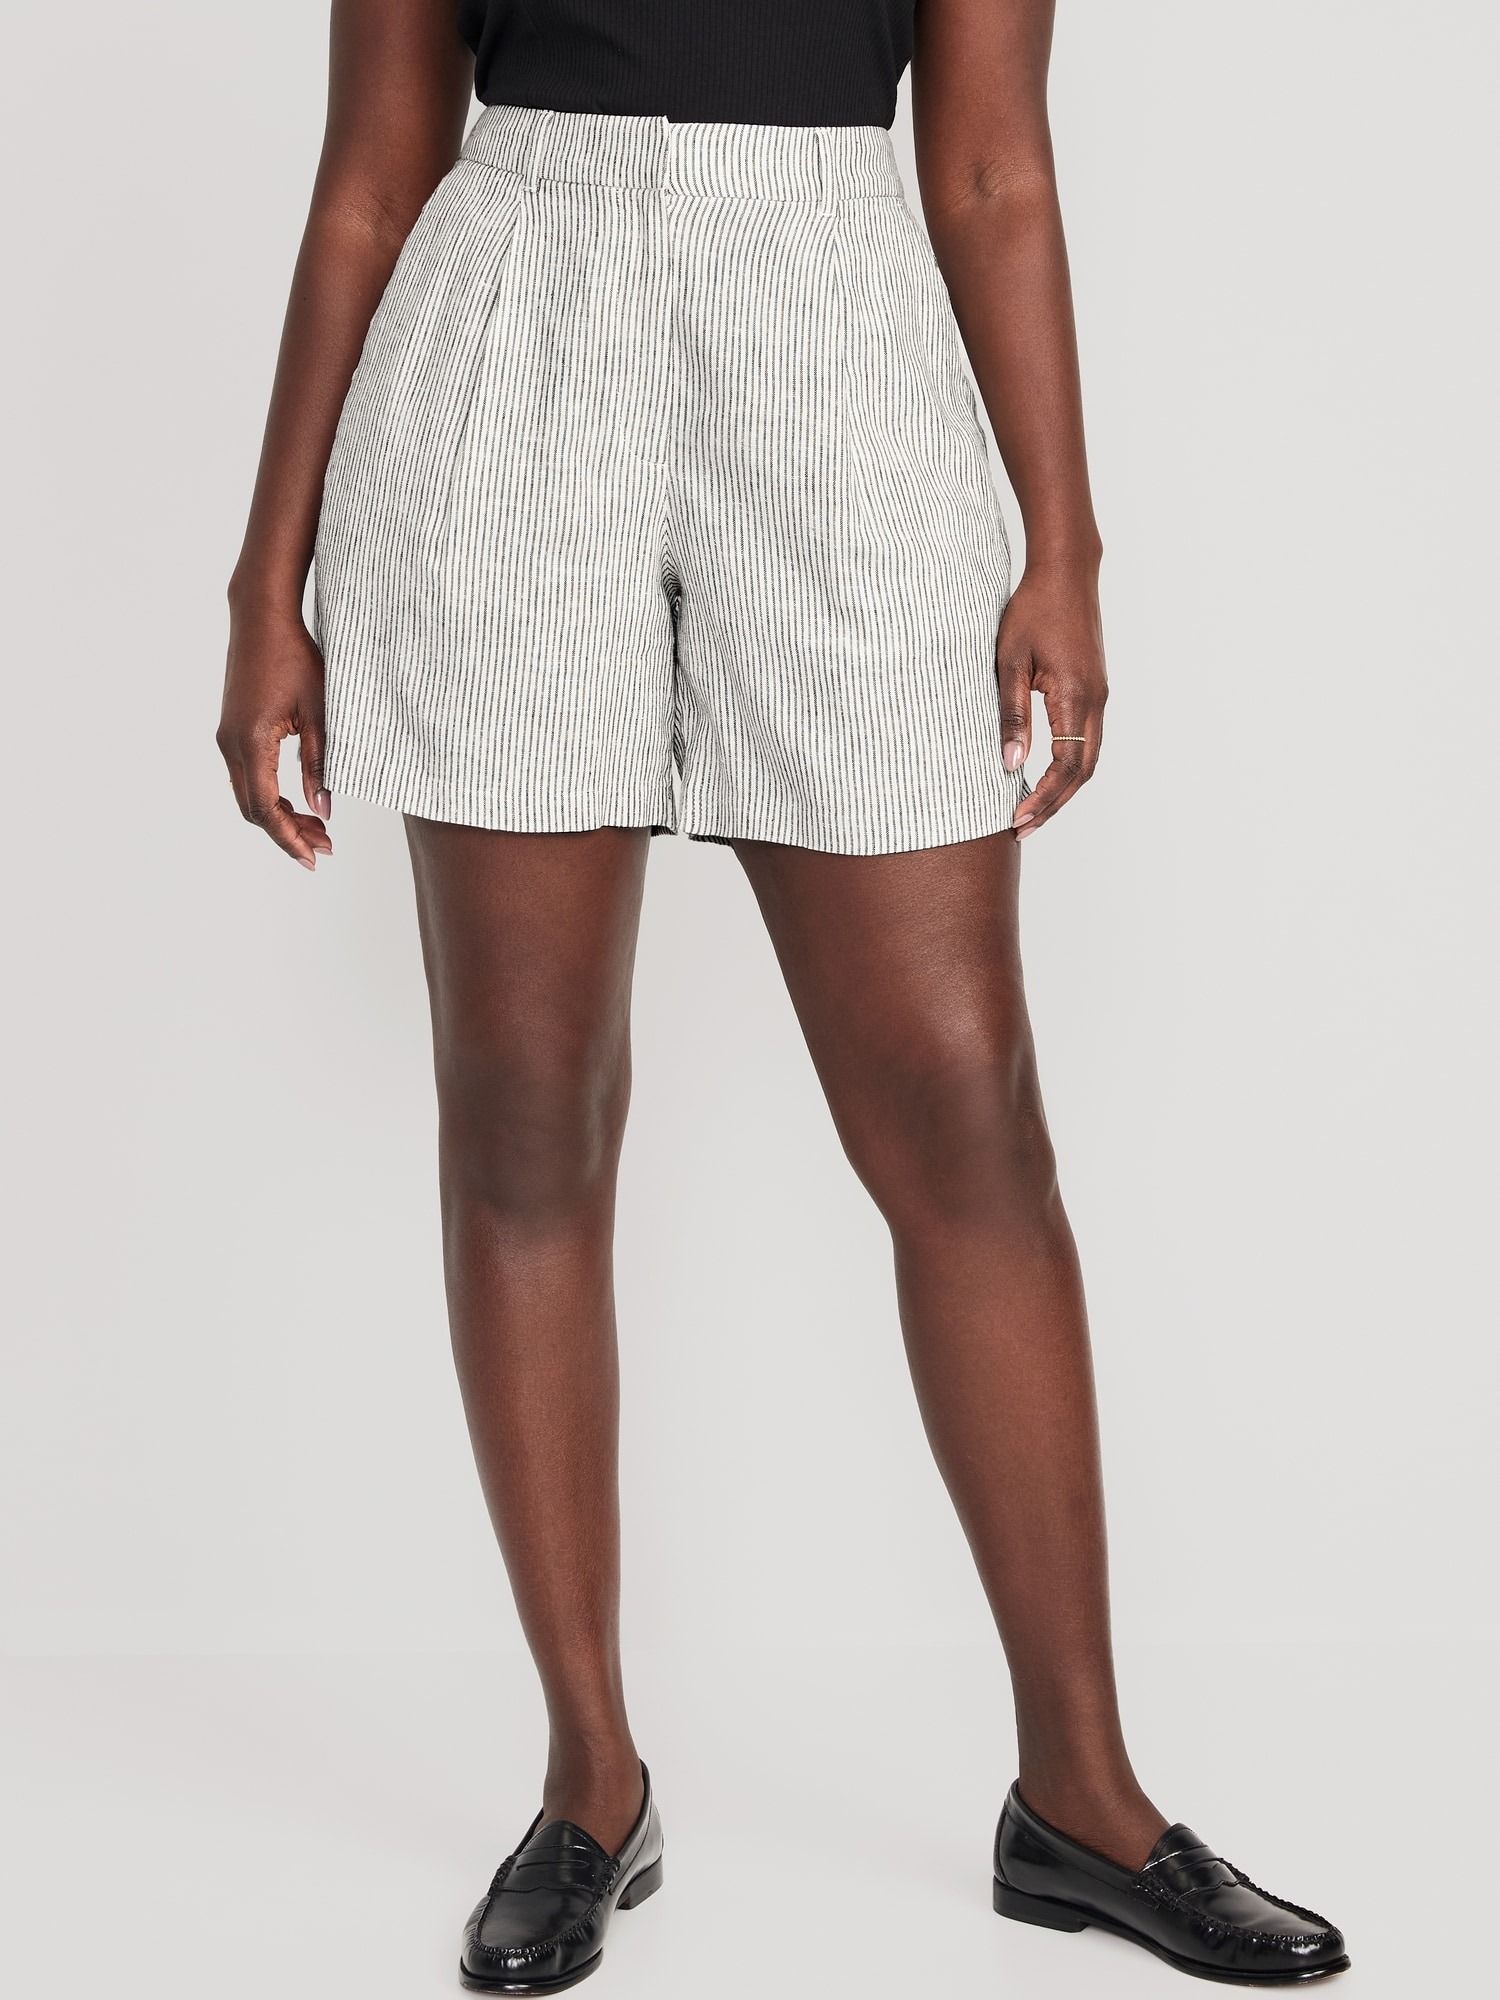 Old Navy Linen Shorts Review 2023